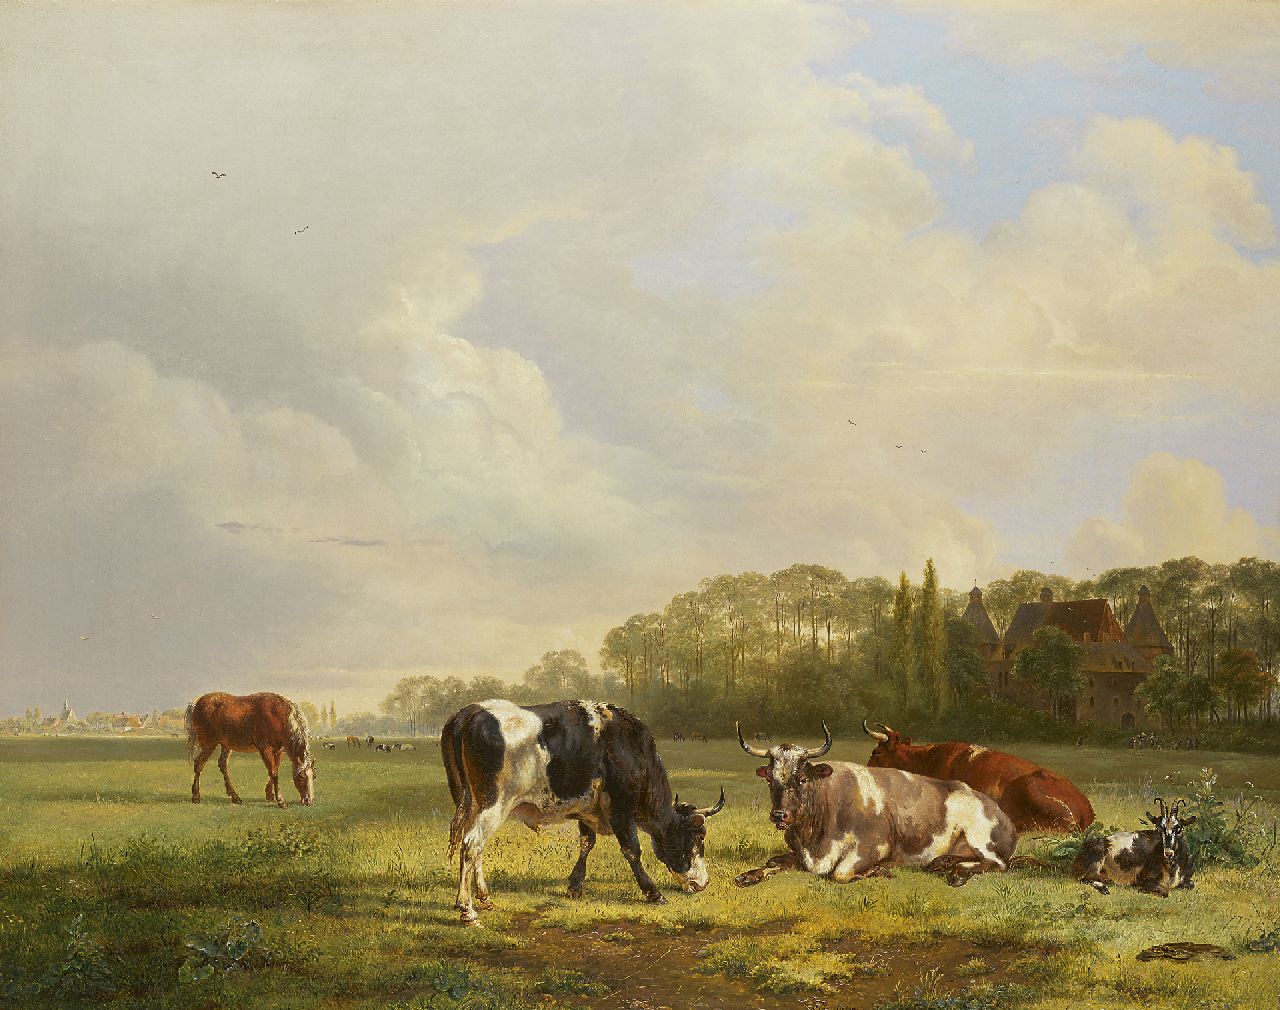 Os P.G. van | Pieter Gerardus van Os, Cattle at pasture, oil on canvas 69.7 x 88.0 cm, signed r.o.c. and dated 1834